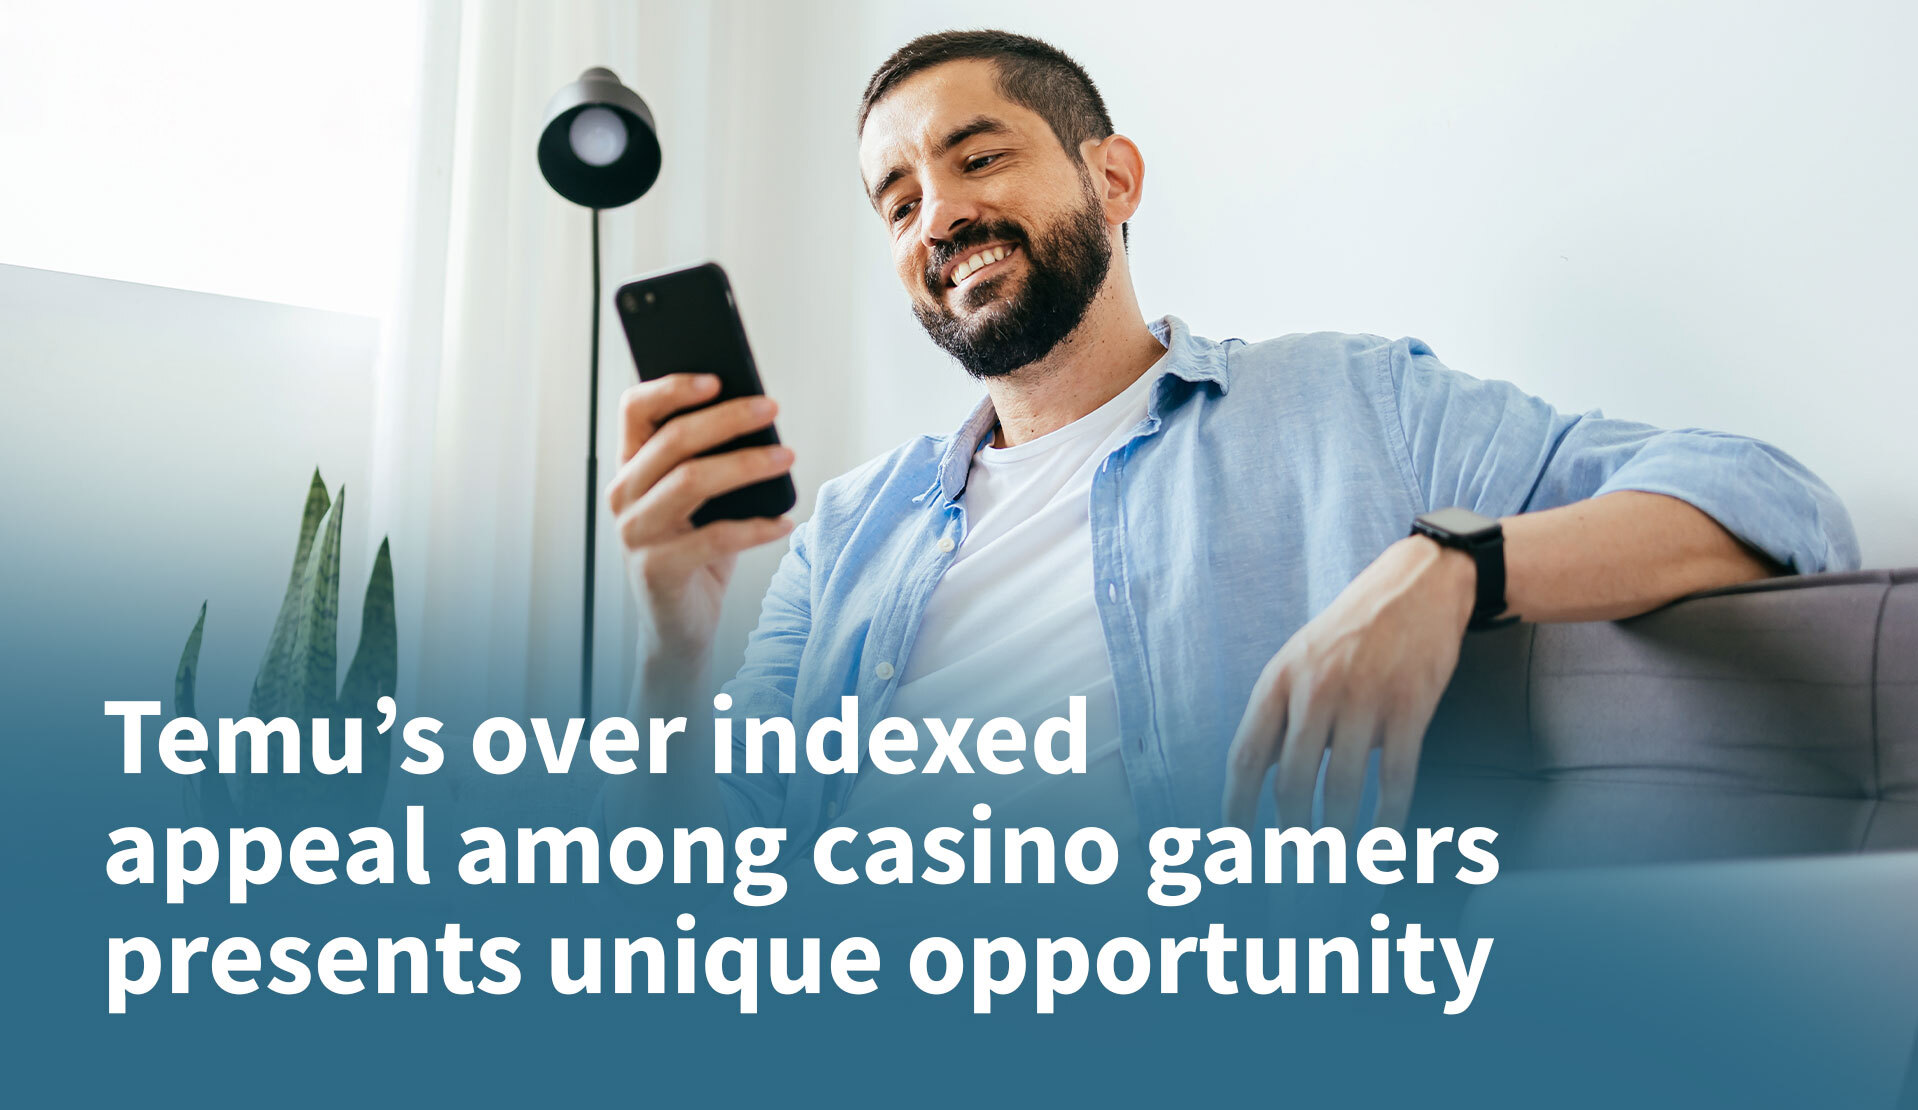 Temu’s Over Indexed Appeal Among Casino Gamers Presents Unique Opportunity